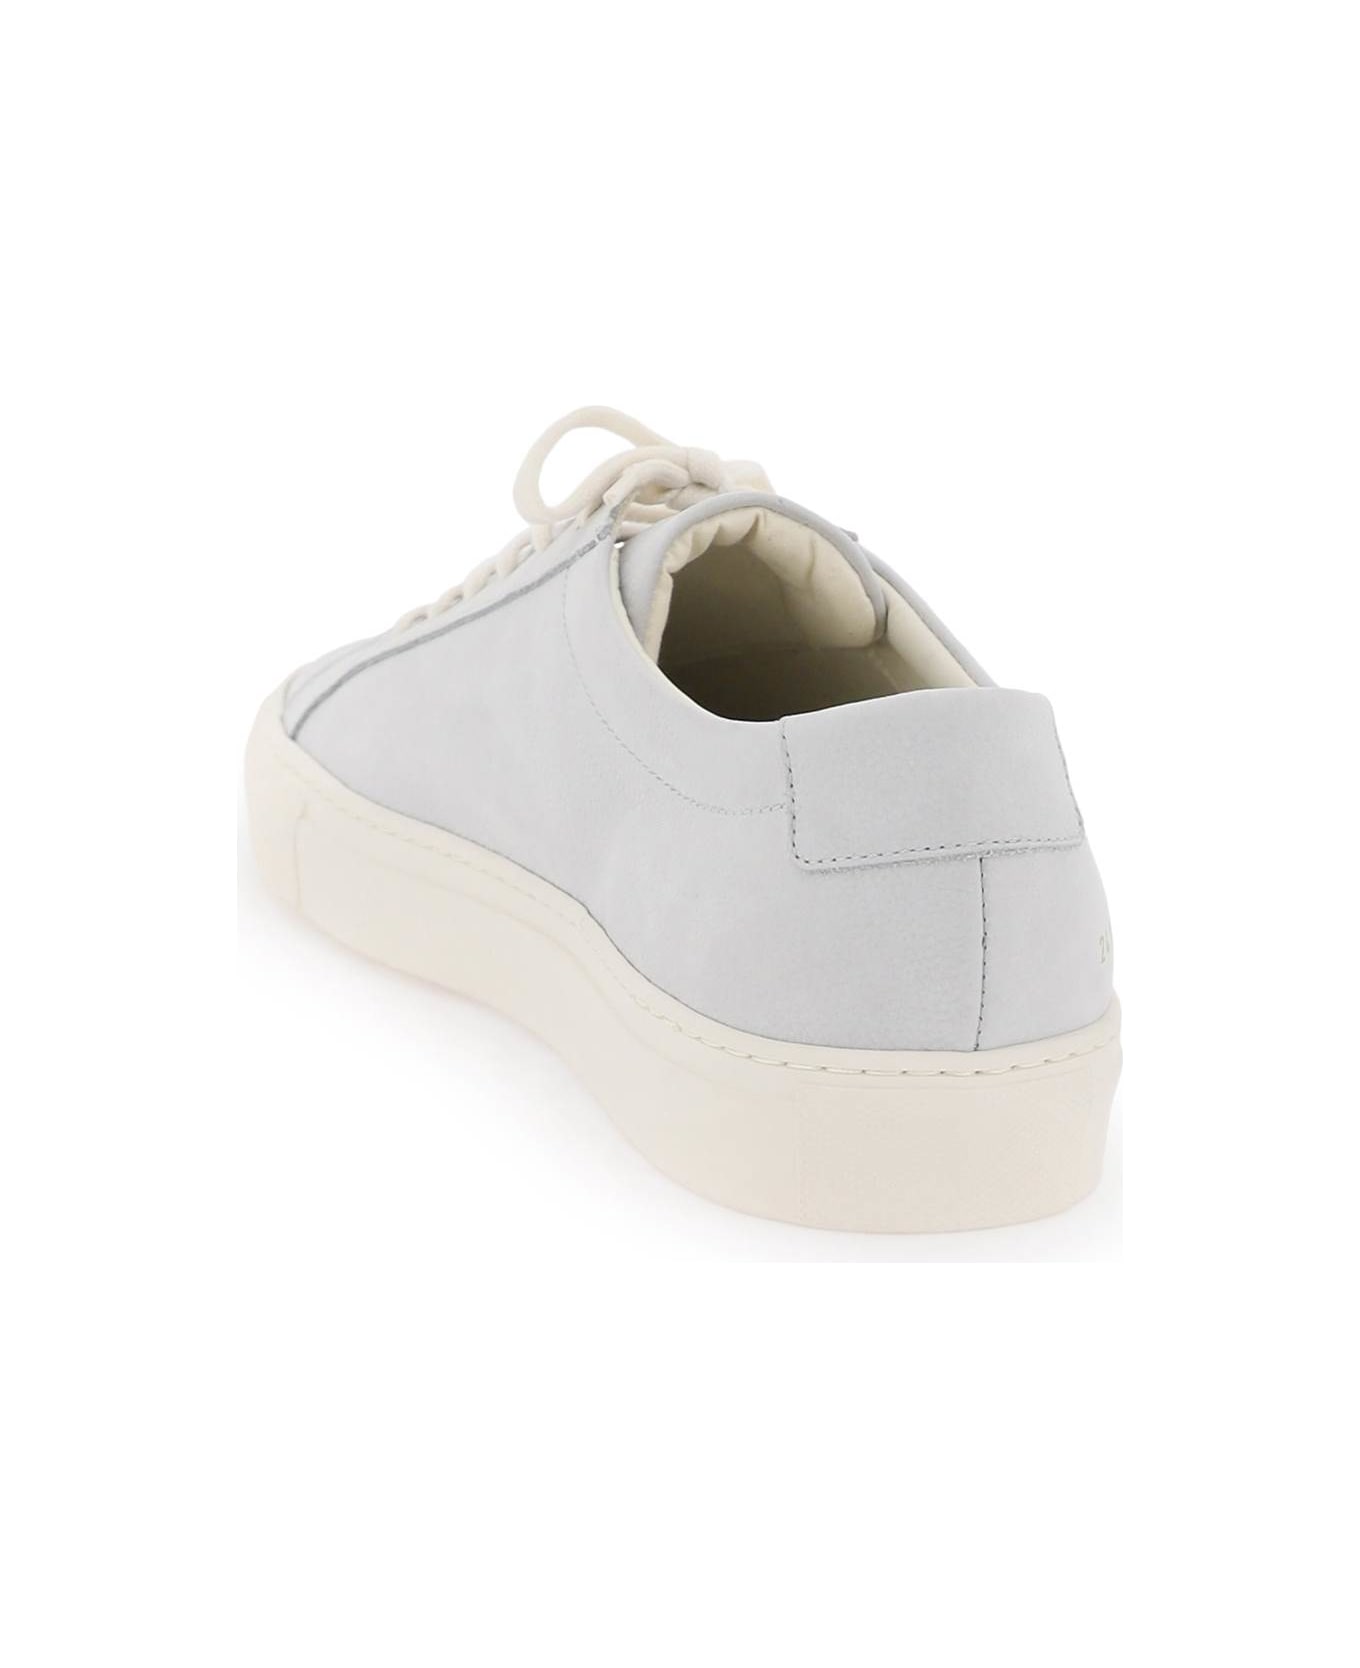 Common Projects Original Achilles Leather Sneakers - GREY